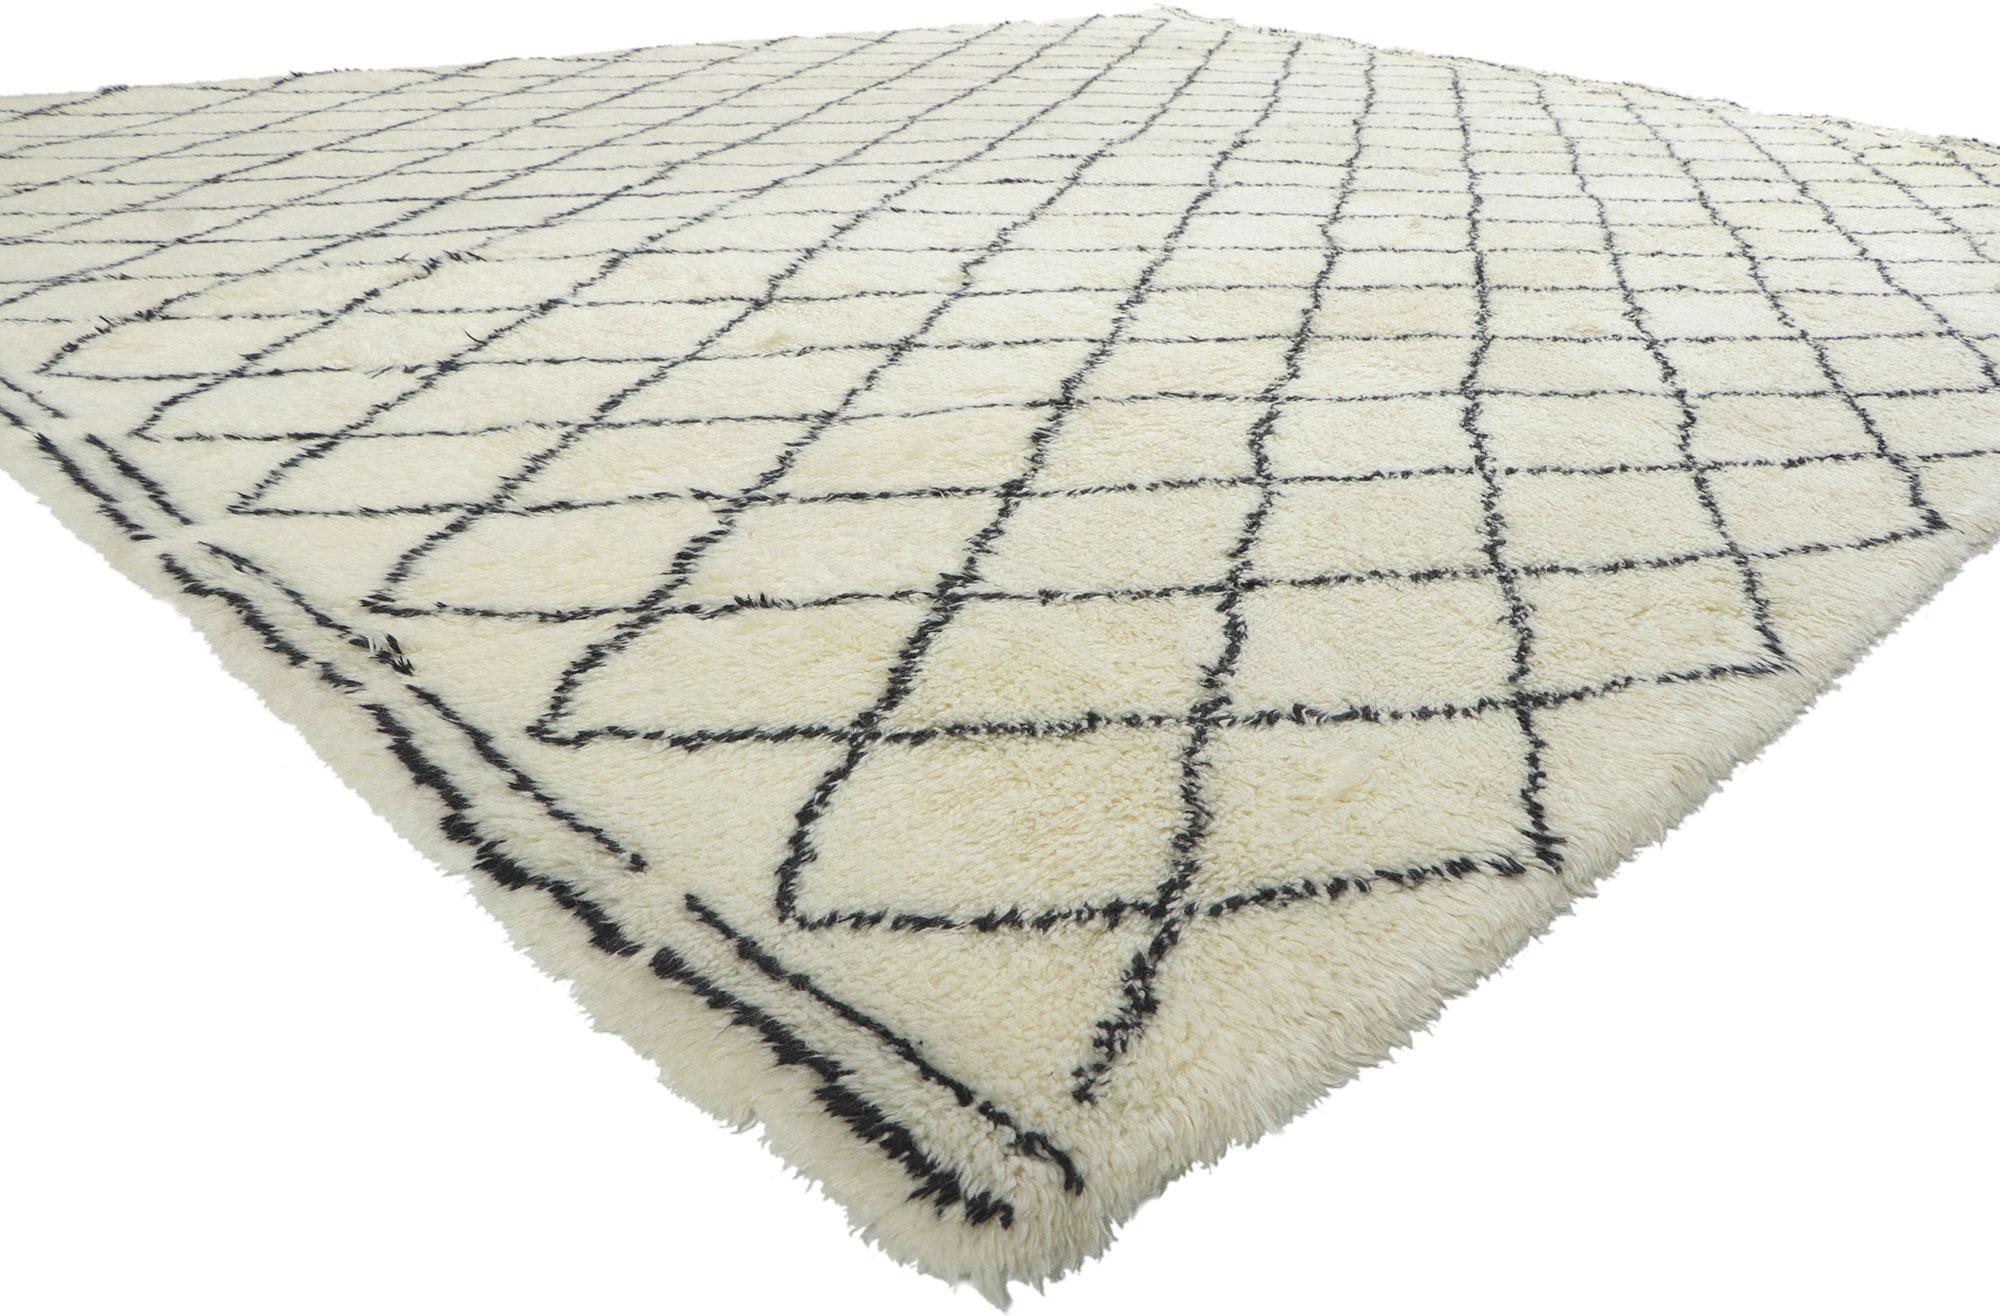 30420 New Moroccan Style Rug, 10’03 x 13’00. Emanating simplicity with a plush pile, this hand knotted wool Moroccan style rug is a captivating vision of woven beauty. The eye-catching diamond trellis and neutral colorway woven into this piece work